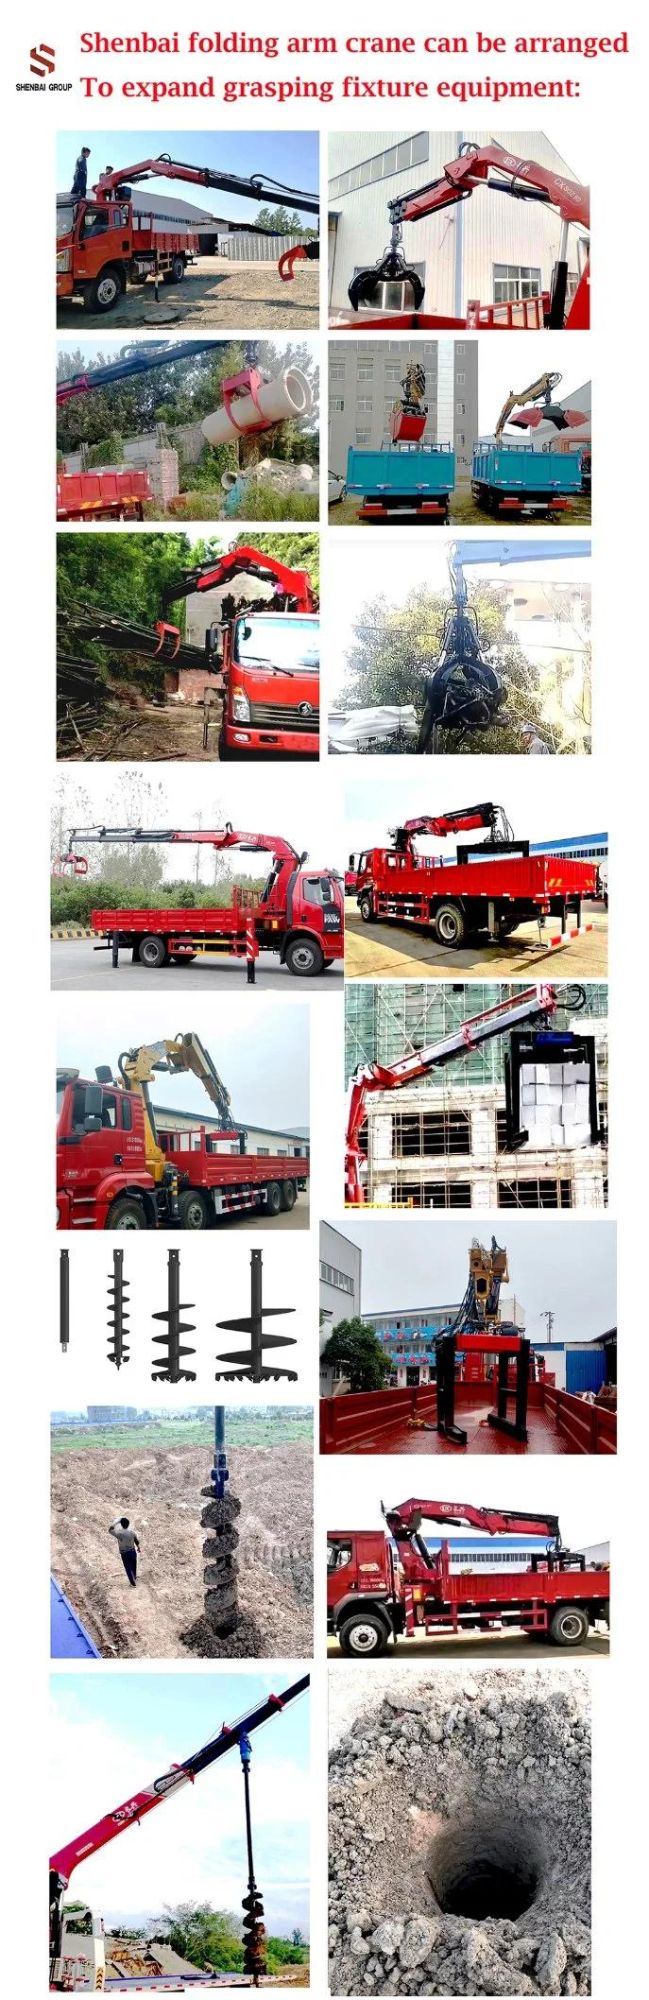 Hot Sale Dongfeng 4X2 Truck Install Shenbai 4 Ton Hydraulic Knuckle Boom Crane with Wood Grabber